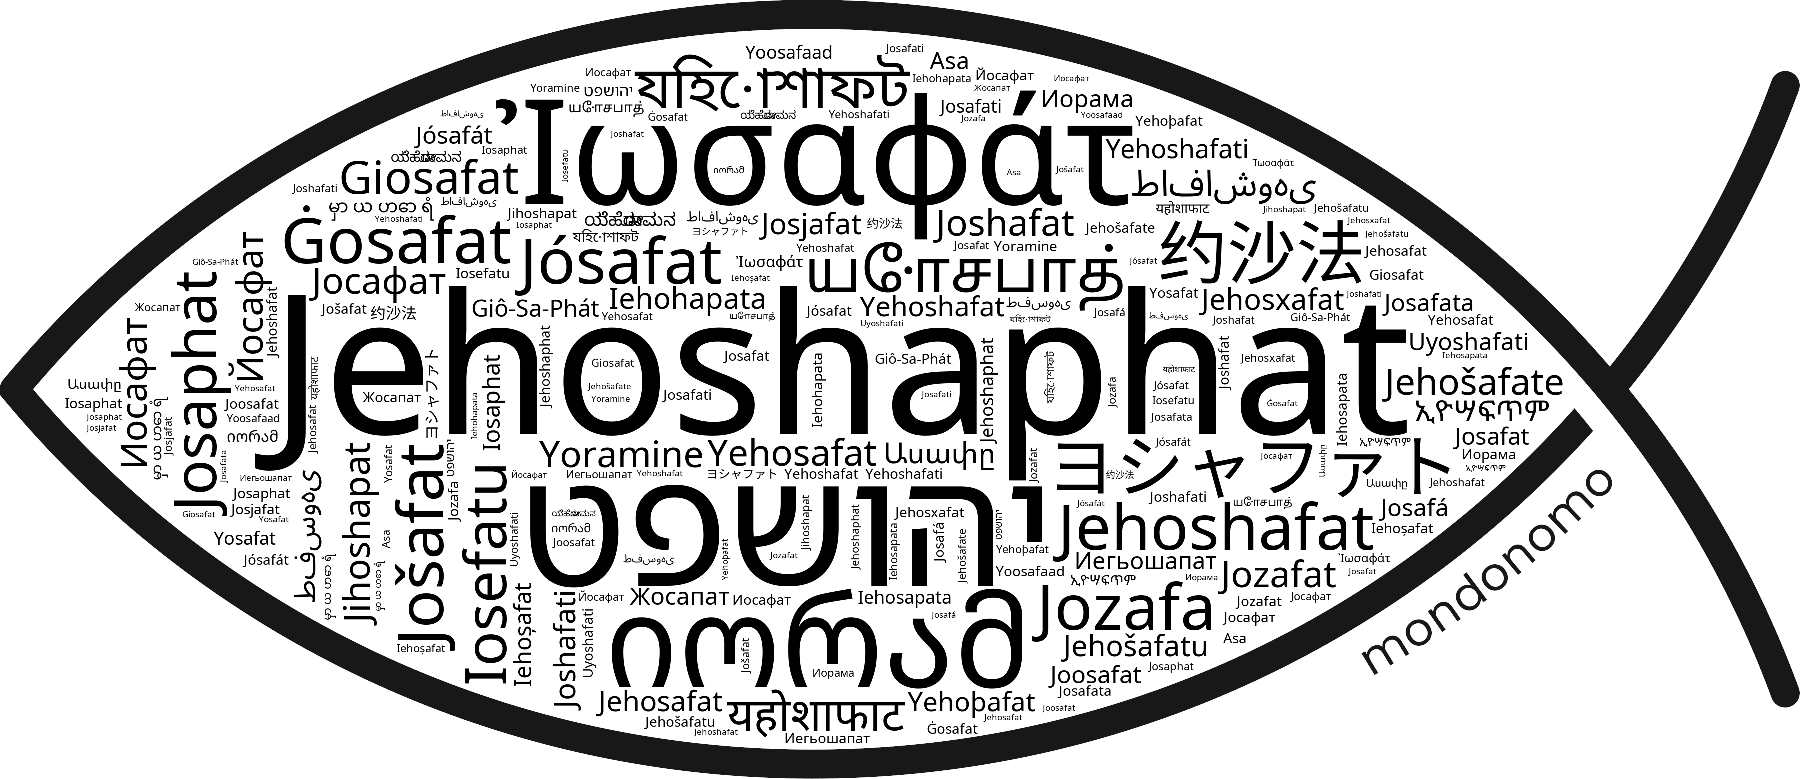 Name Jehoshaphat in the world's Bibles